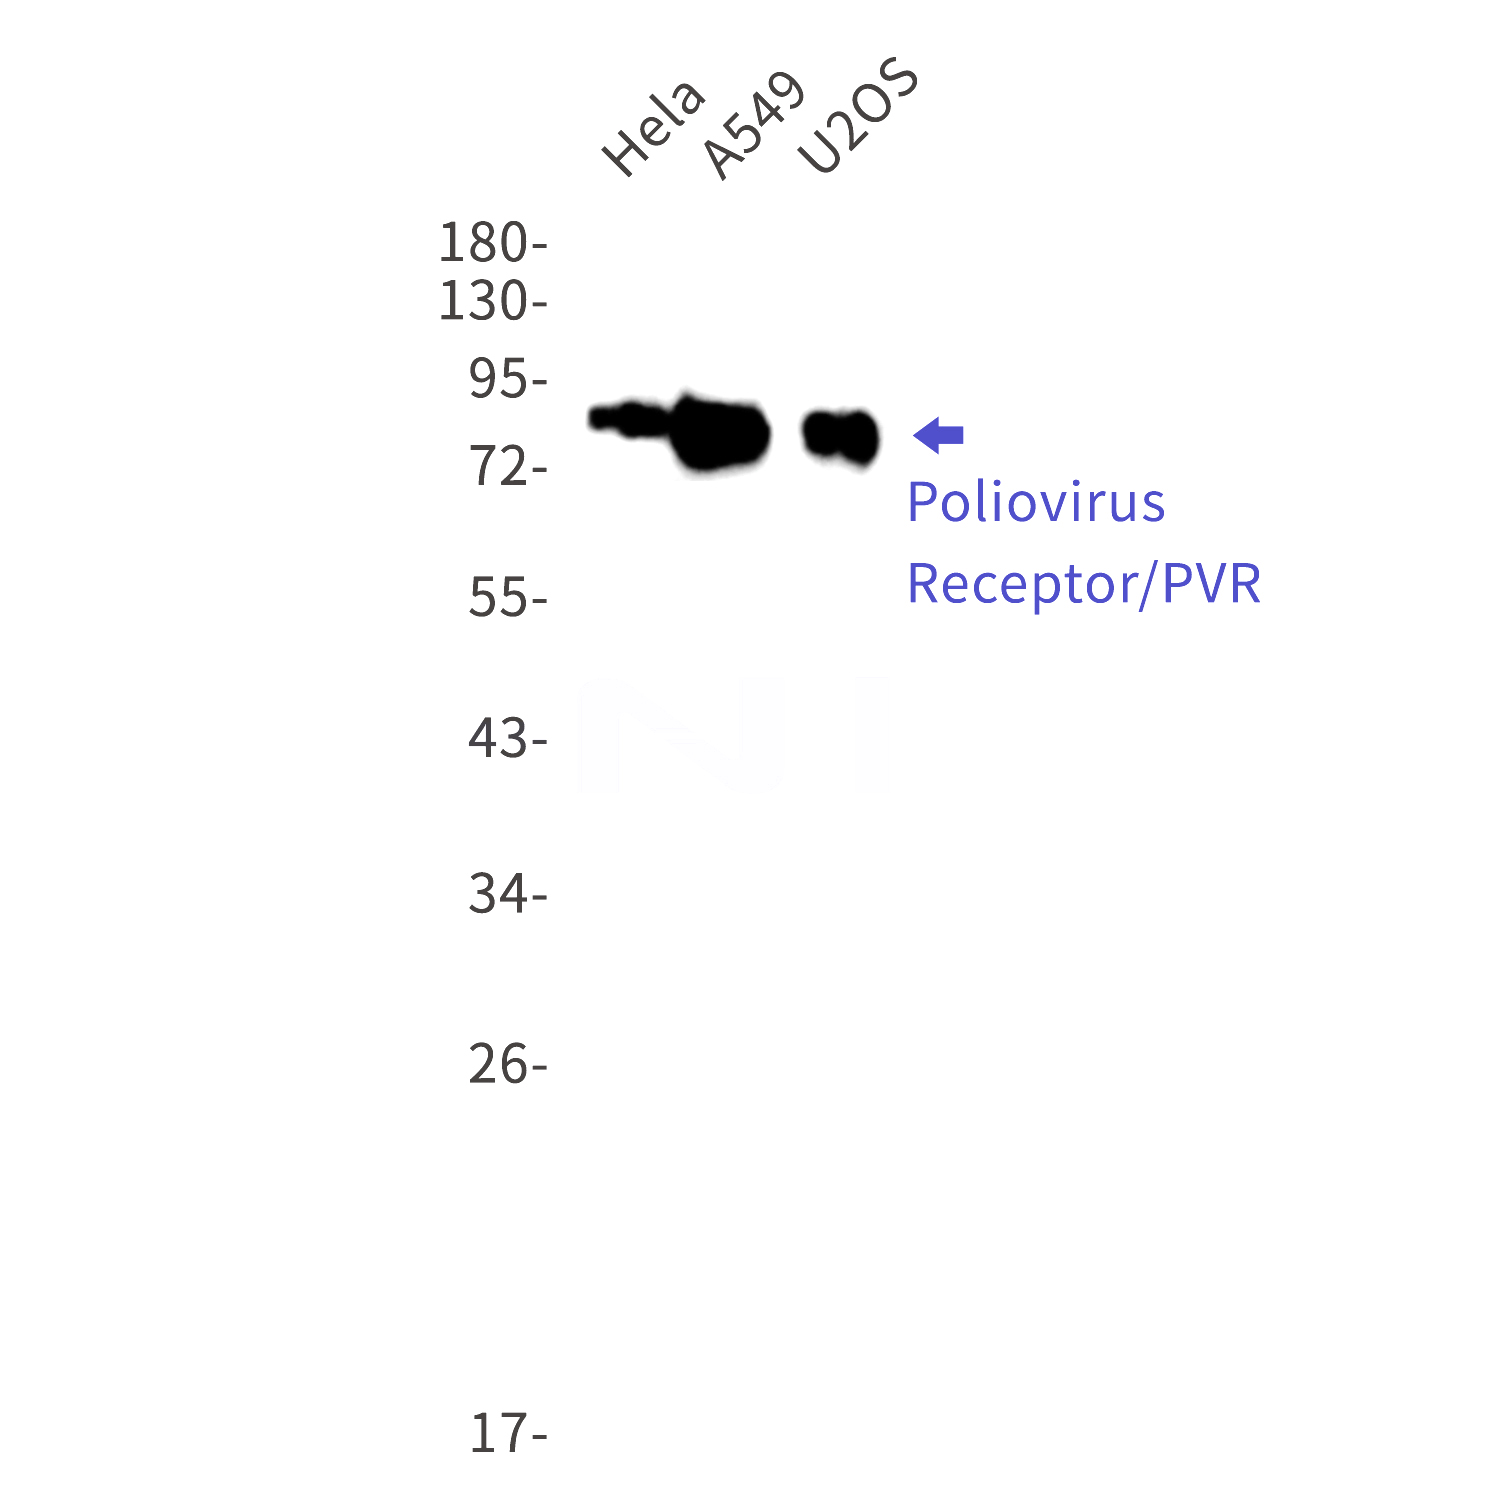 Western blot detection of  Poliovirus Receptor/PVR in Hela,A549,U2OS cell lysates using Poliovirus Receptor/PVR Rabbit mAb(1:1000 diluted).Predicted band size:45kDa.Observed band size:60-80kDa.